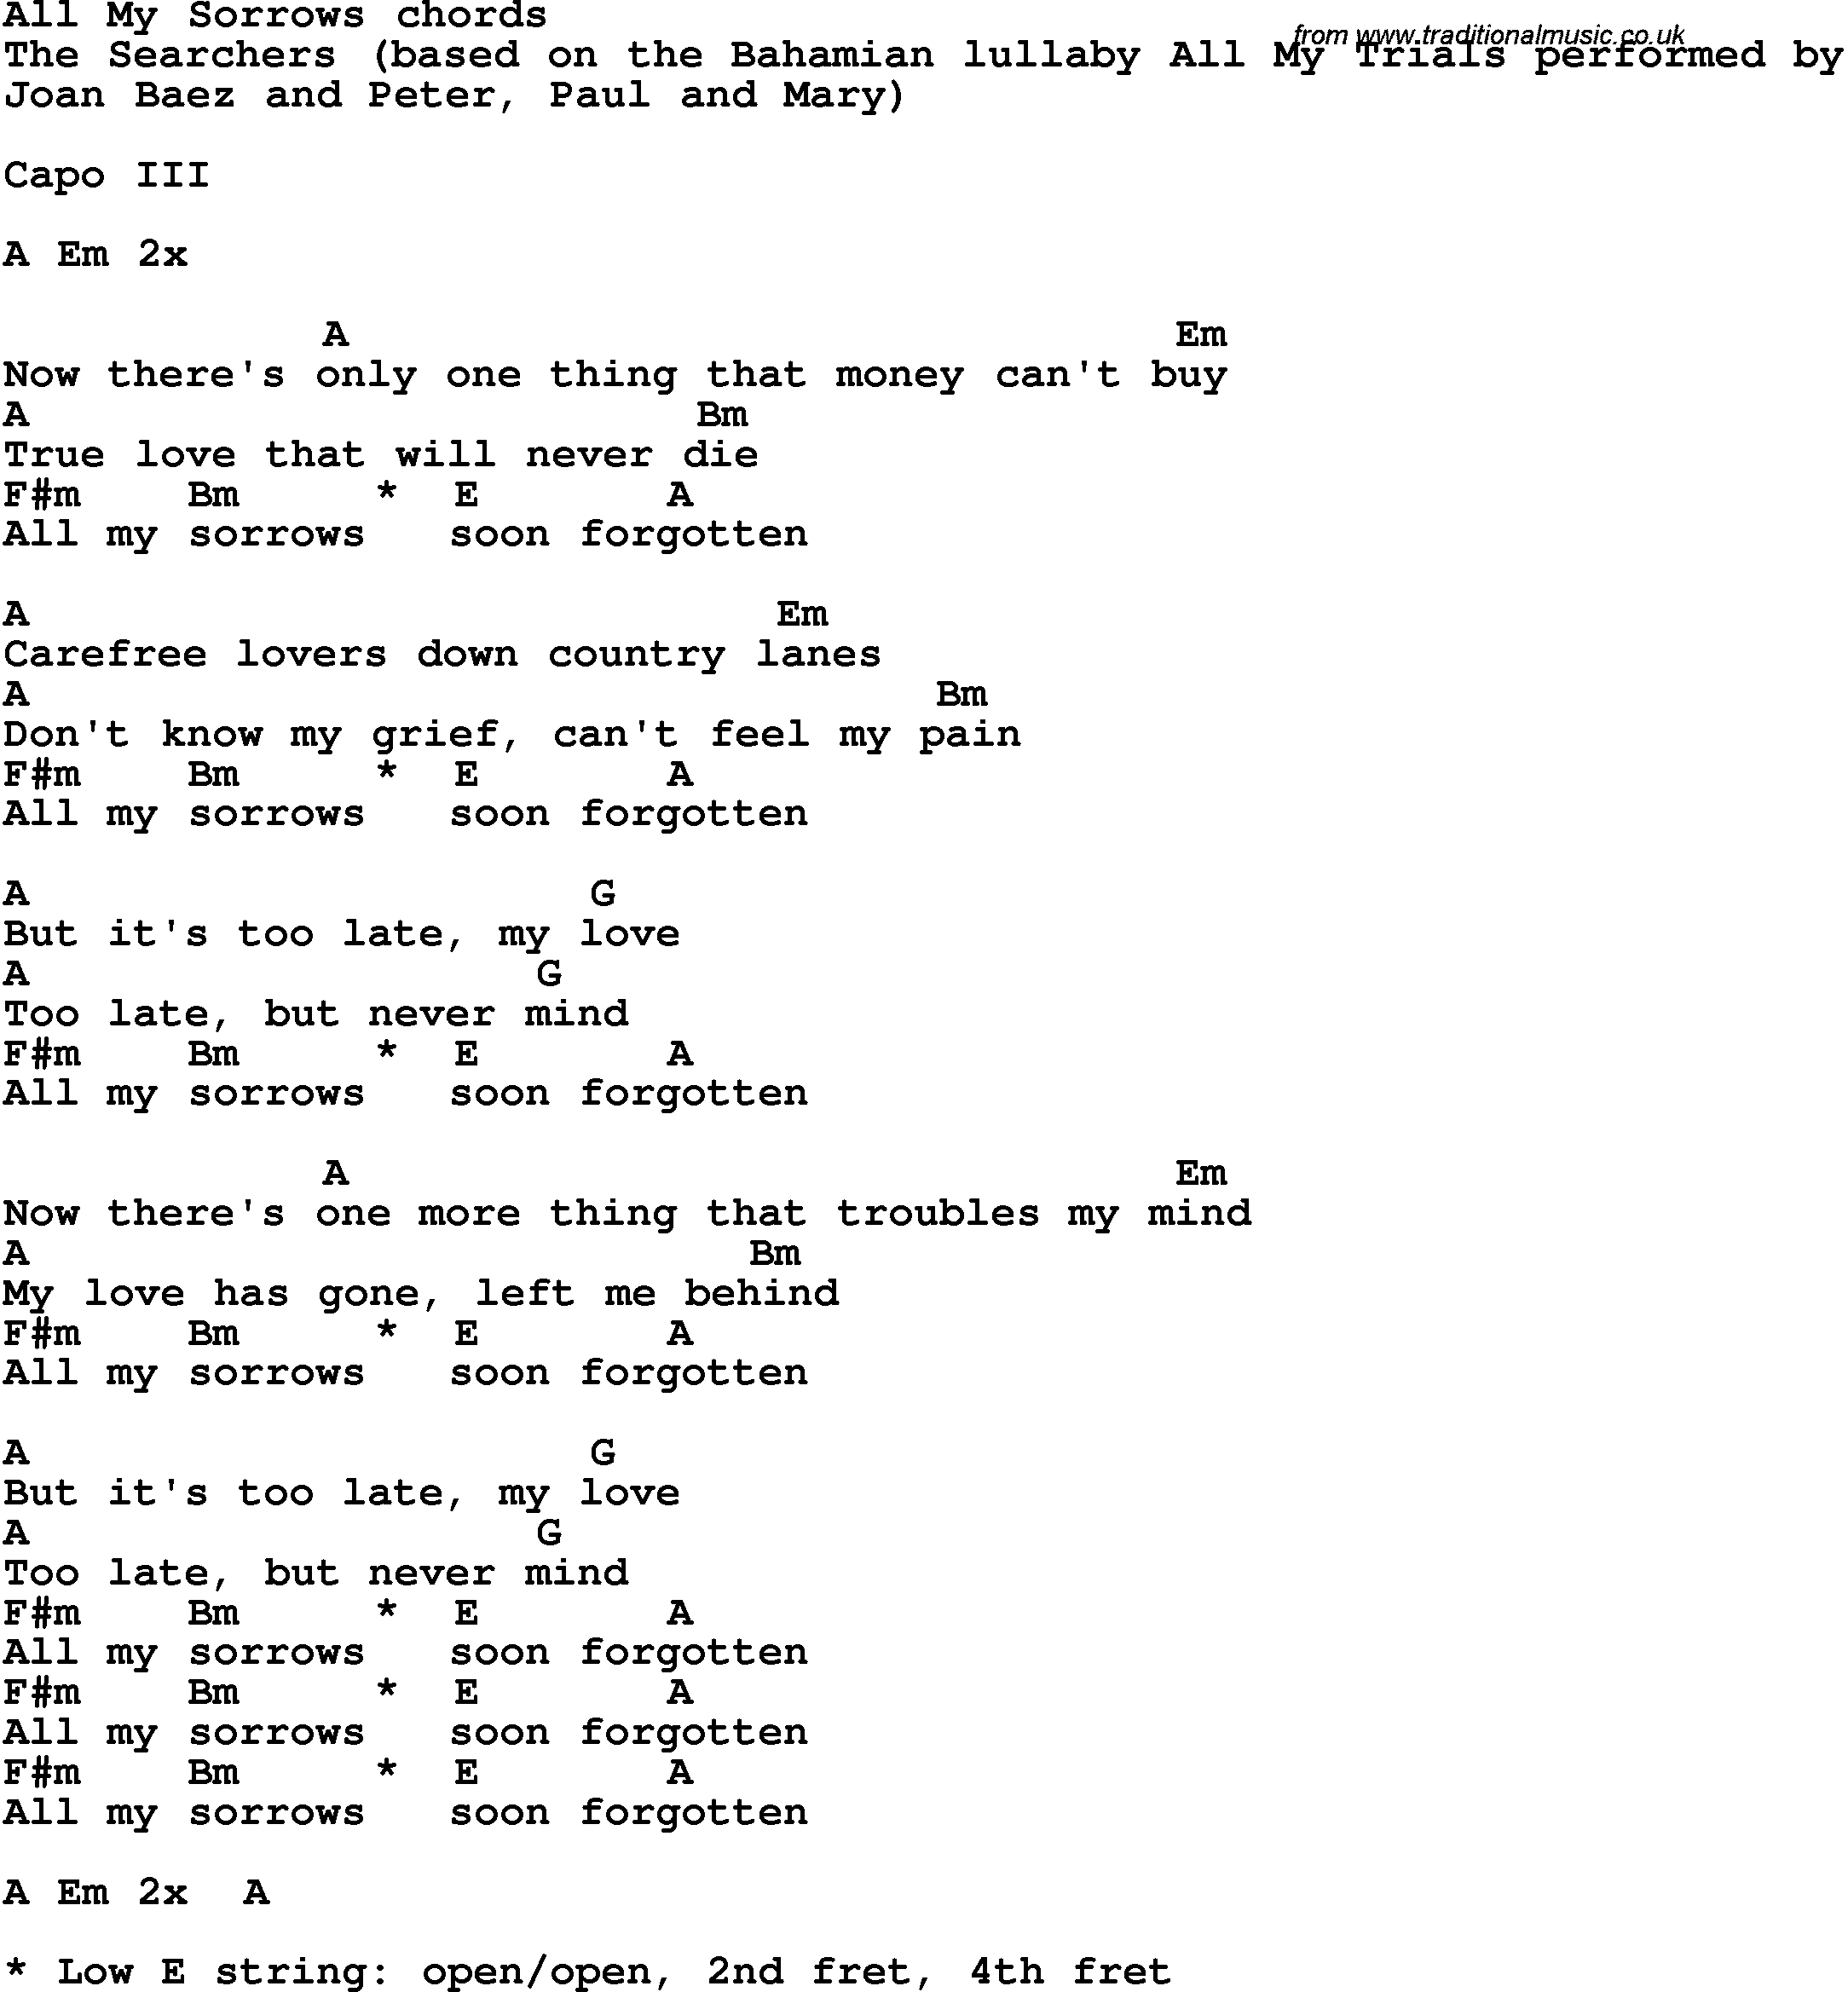 Song Lyrics with guitar chords for All My Sorrows